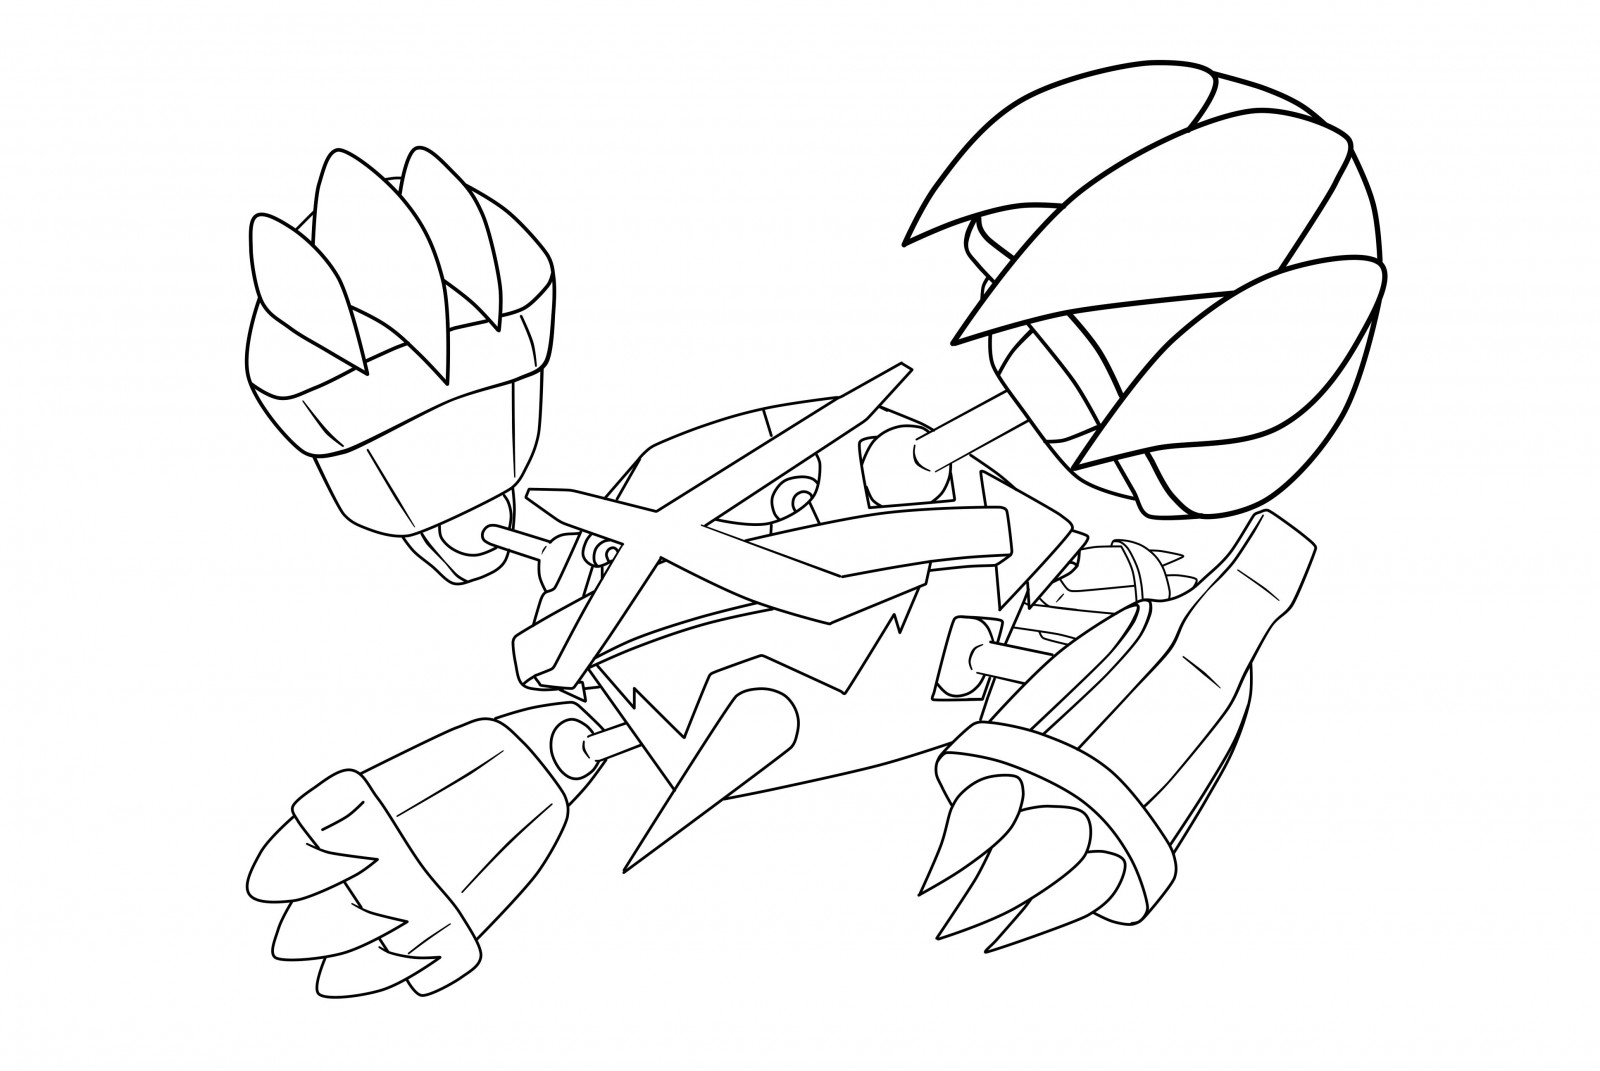 Pokemon Rayquaza Coloring Pages at GetColorings.com | Free ...